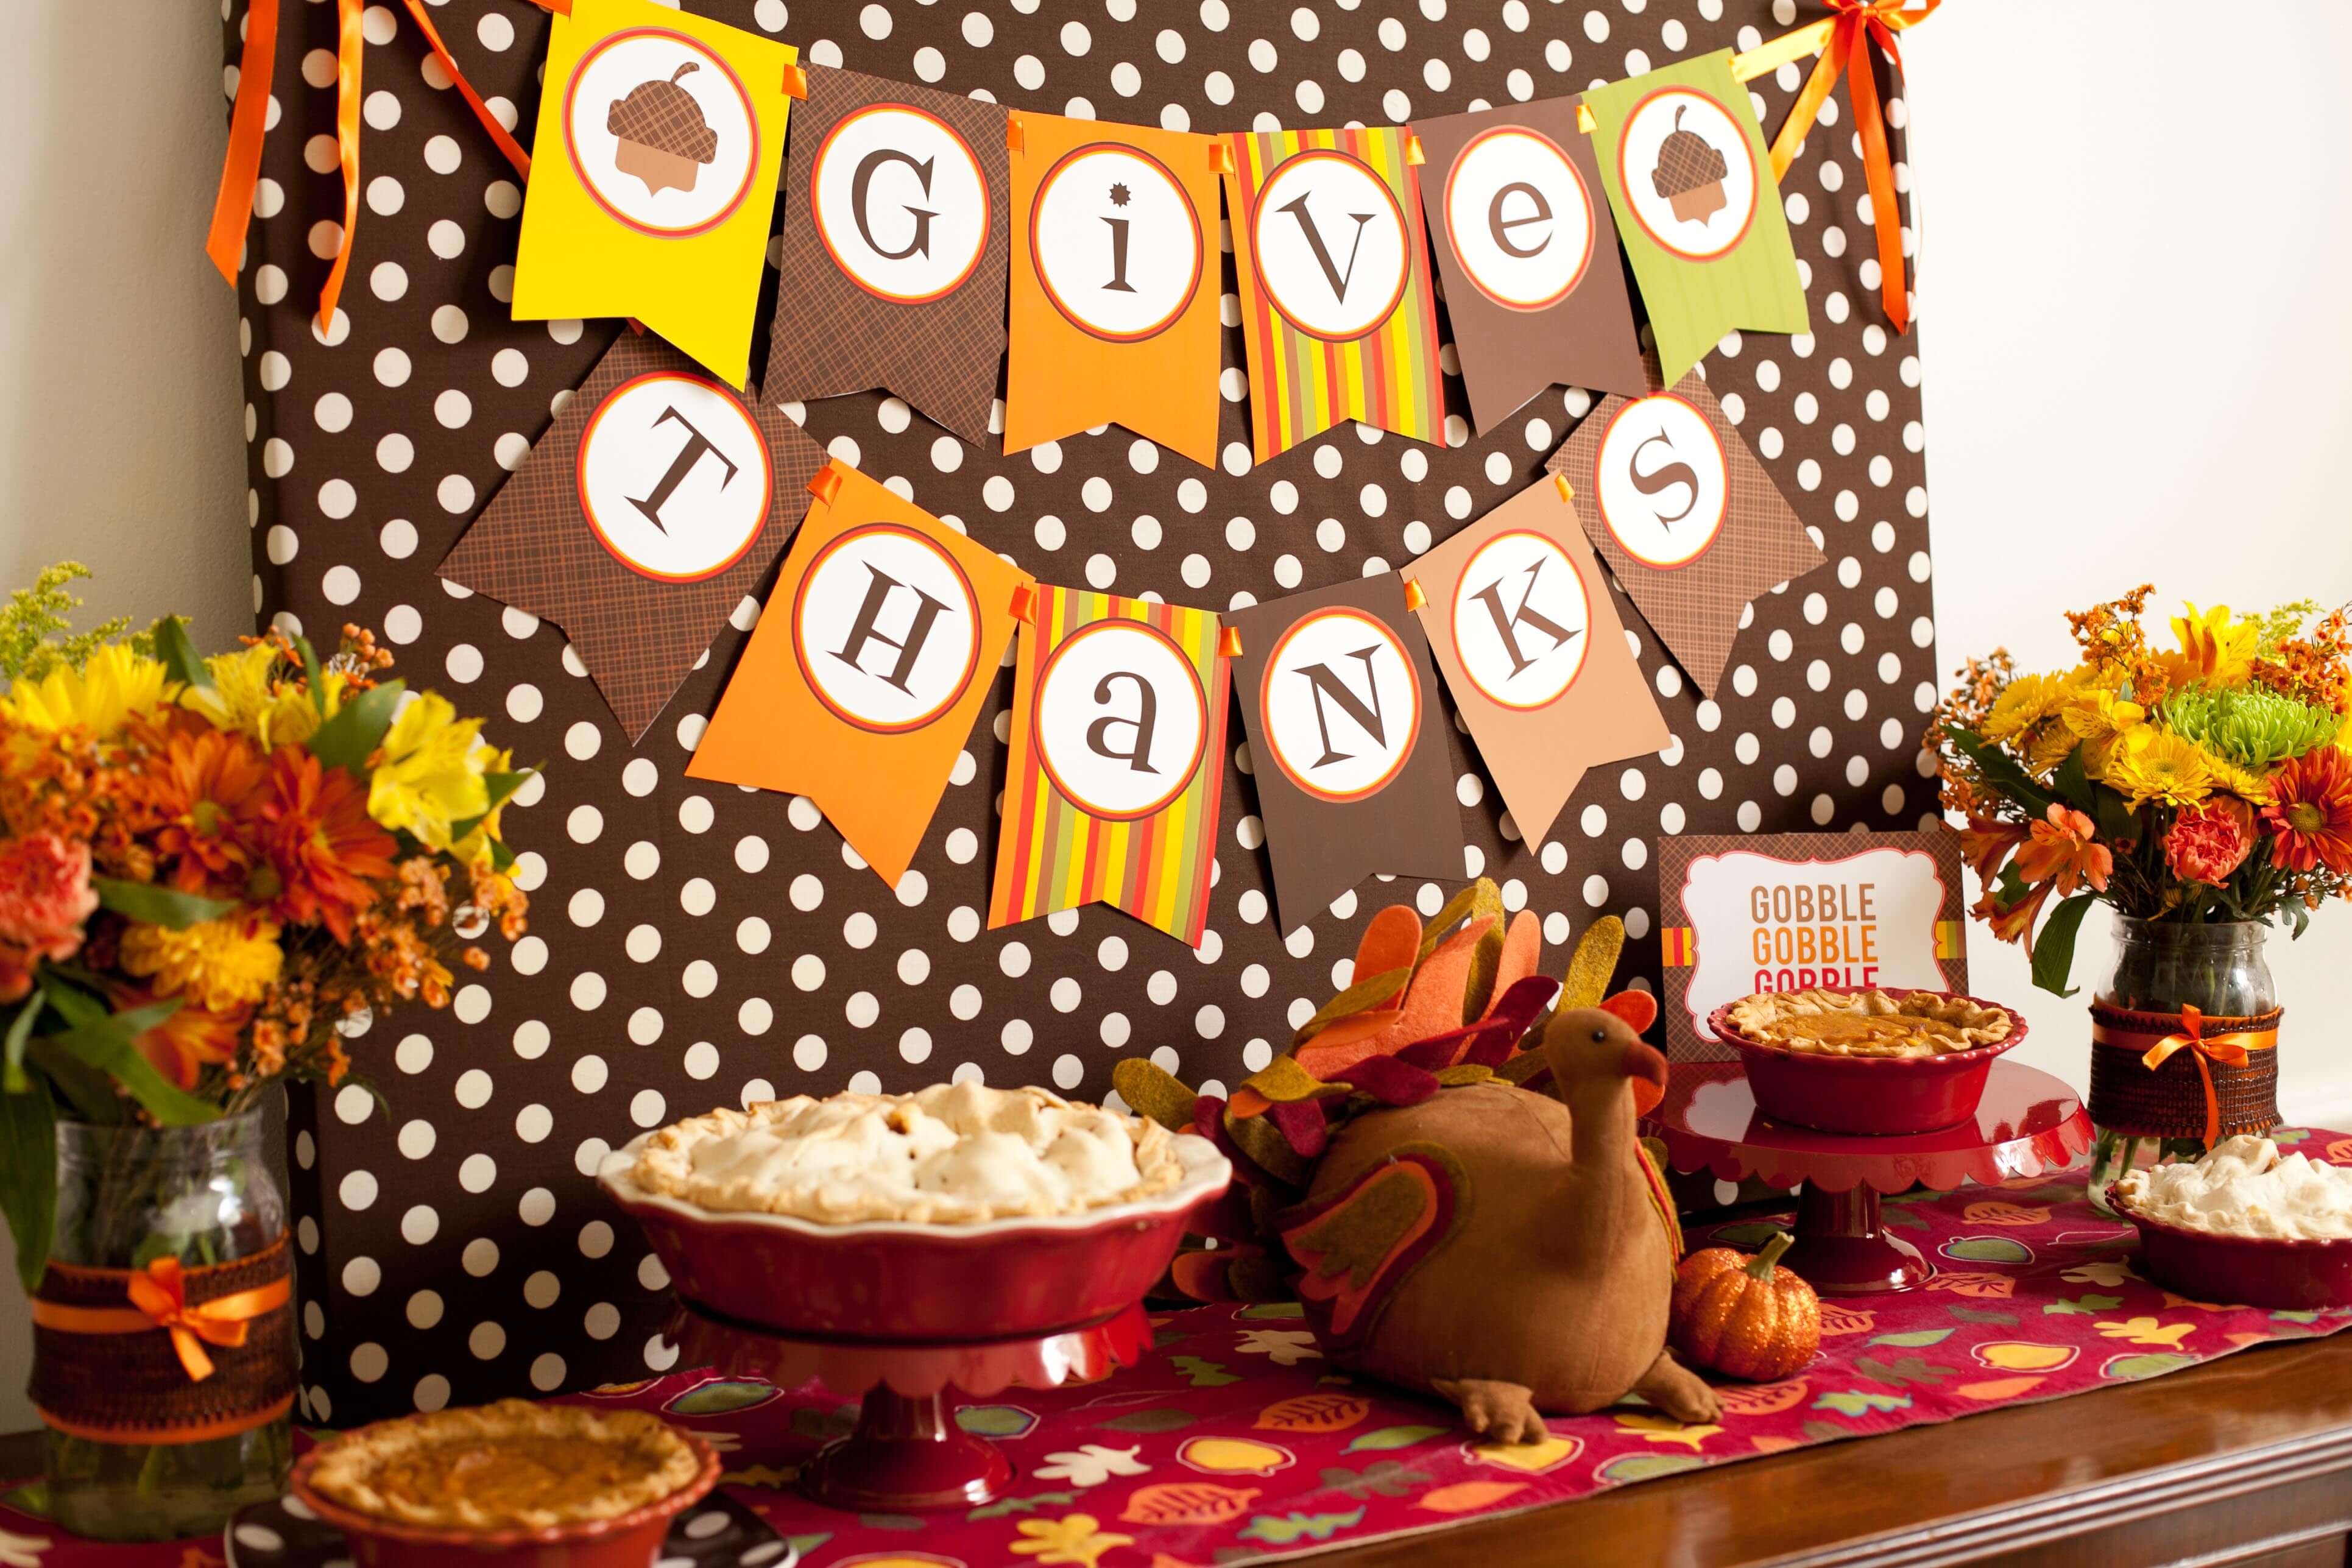 DIY fall decor for Thanksgiving dining experiences